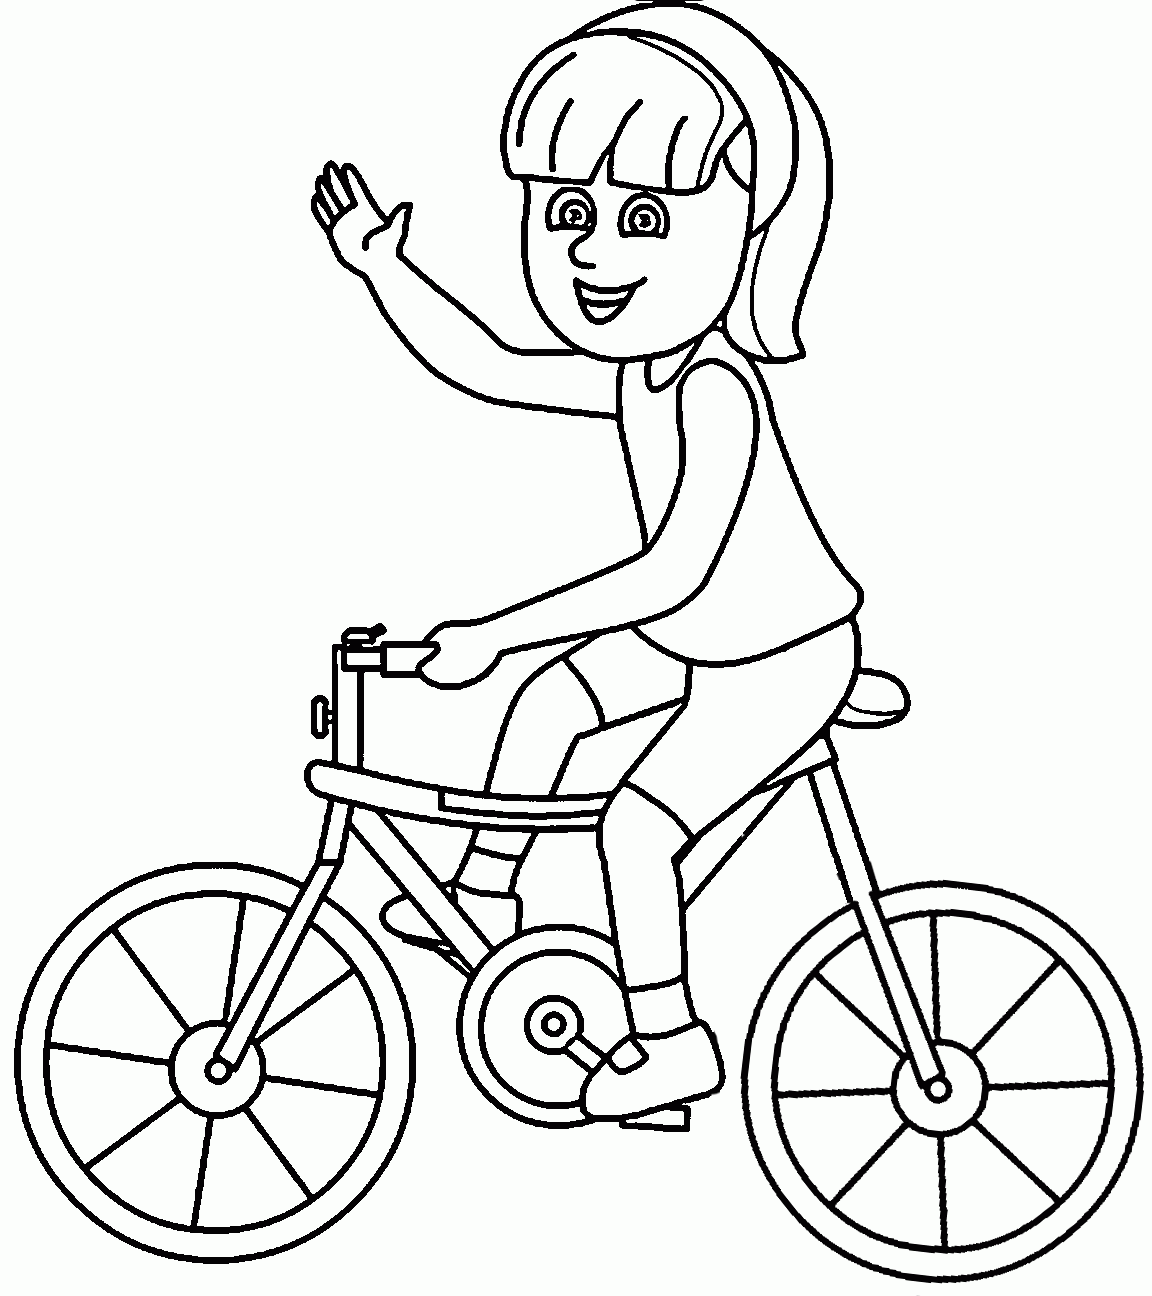 Bike Riding Coloring Page Coloring Home